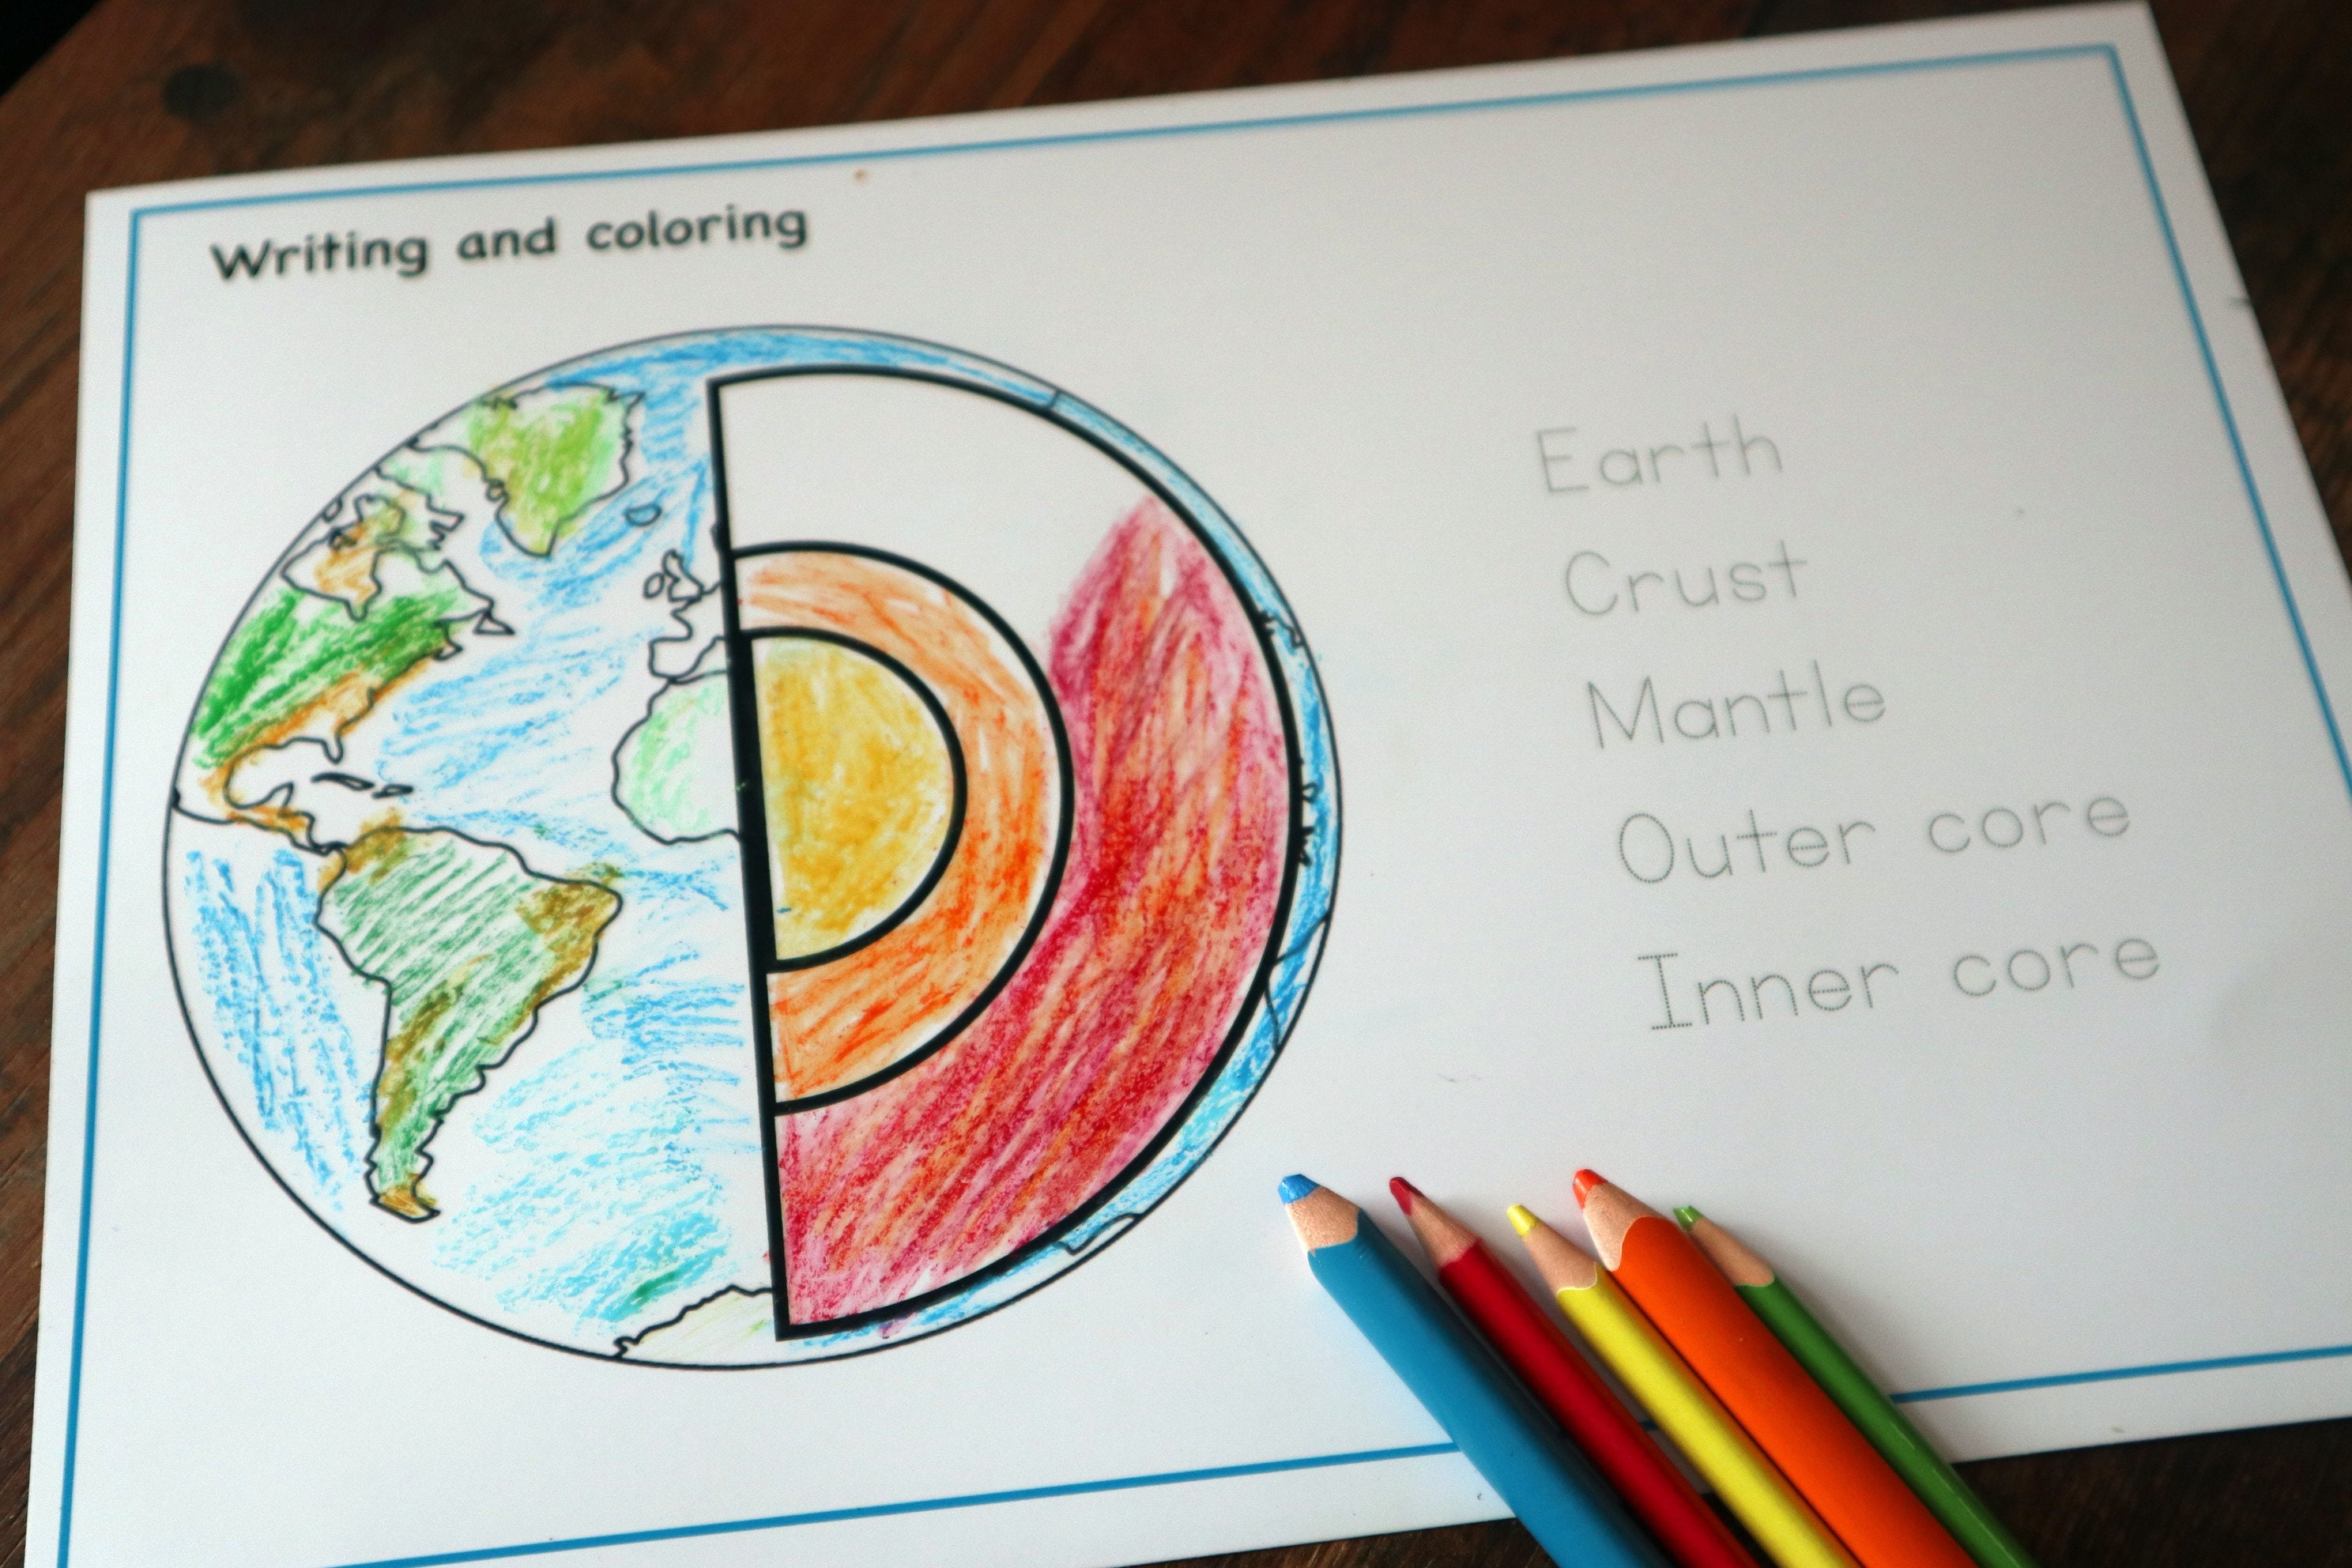 3 Ways to Make a Model of the Earth - wikiHow